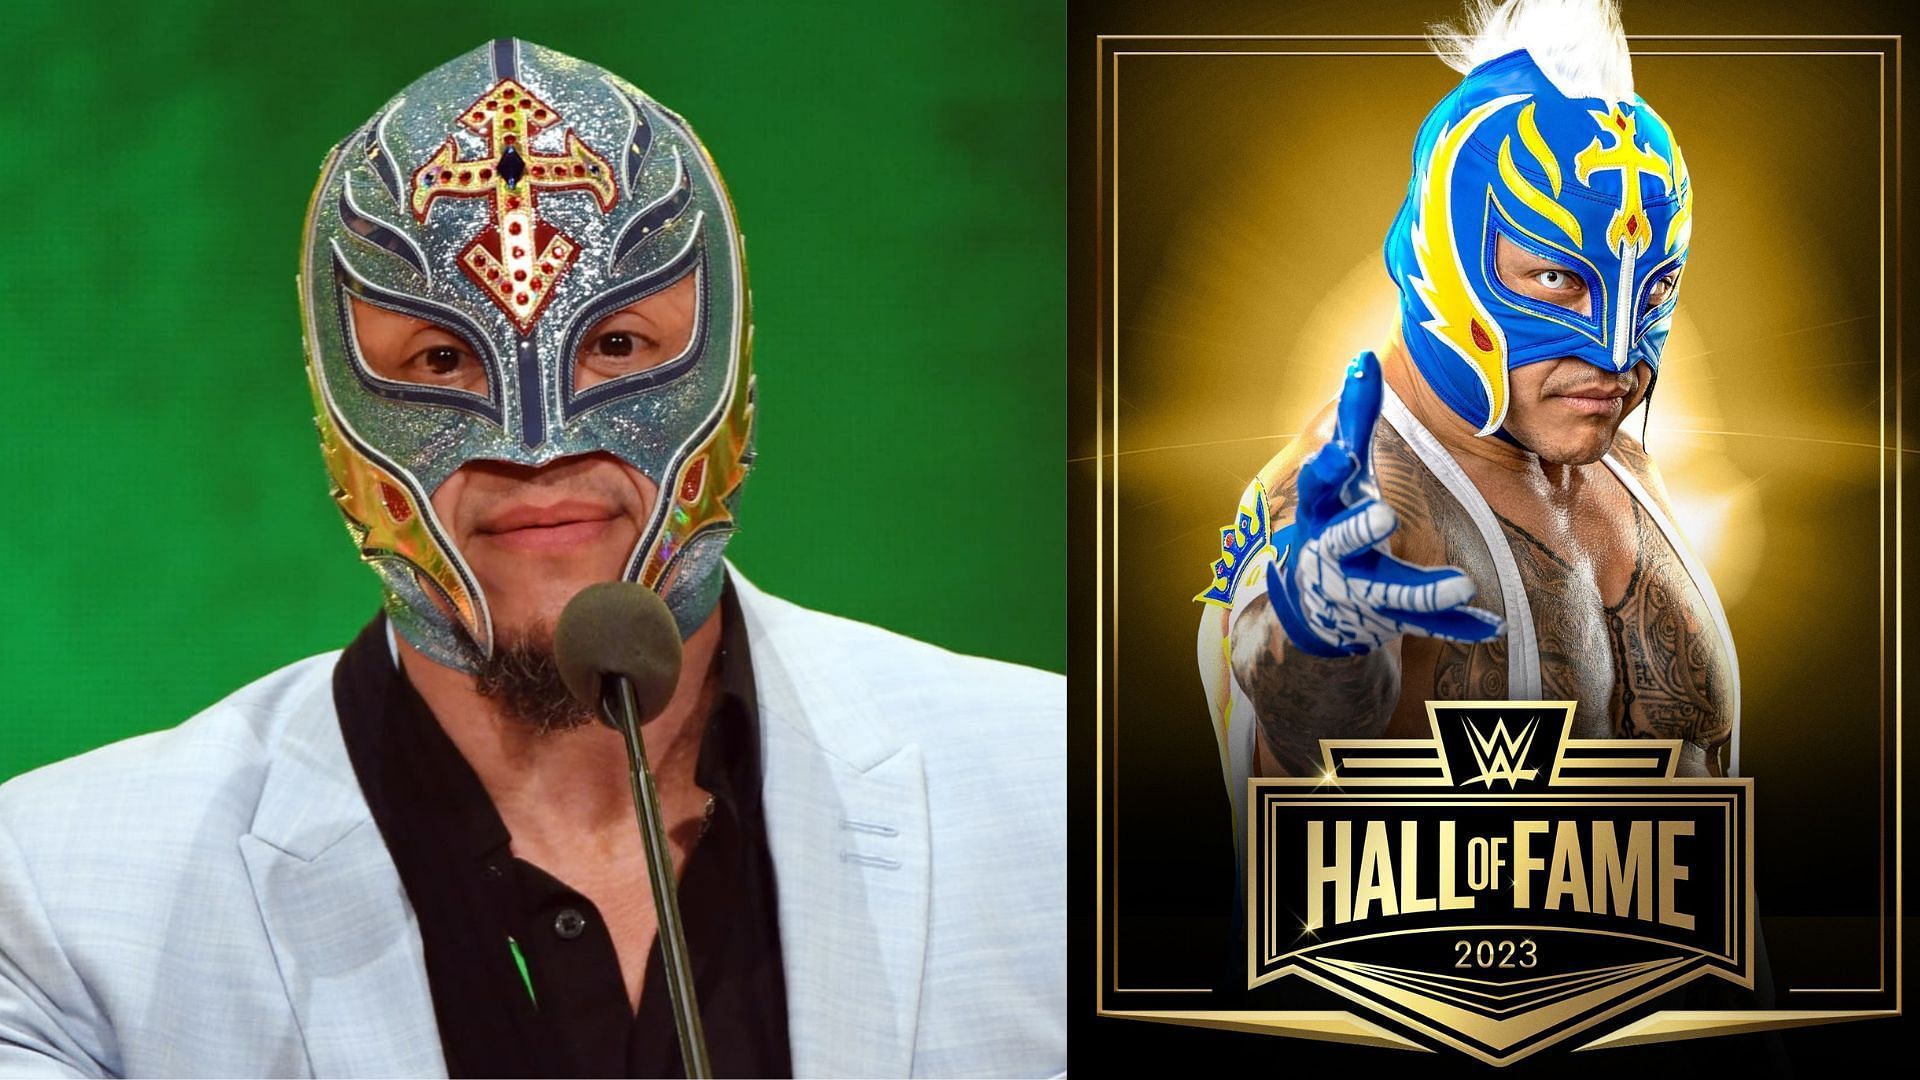 Rey Mysterio will be inducted into the WWE Hall of Fame this year.